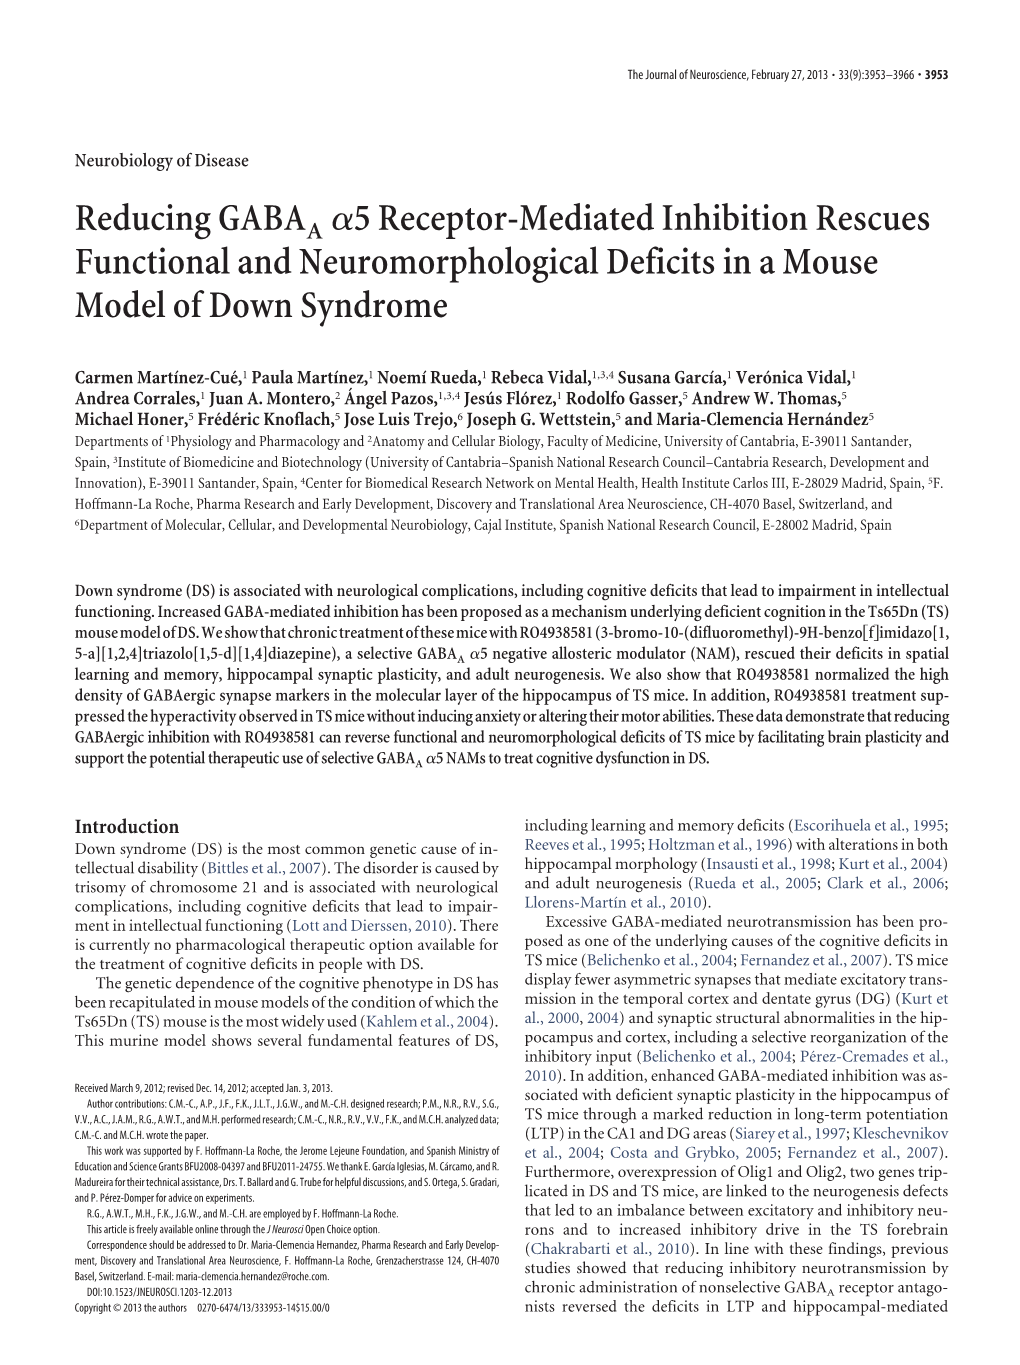 Reducing GABAA Α5 Receptor-Mediated Inhibition Rescues Functional and Neuromorphological Deficits in a Mouse Model of Down Synd